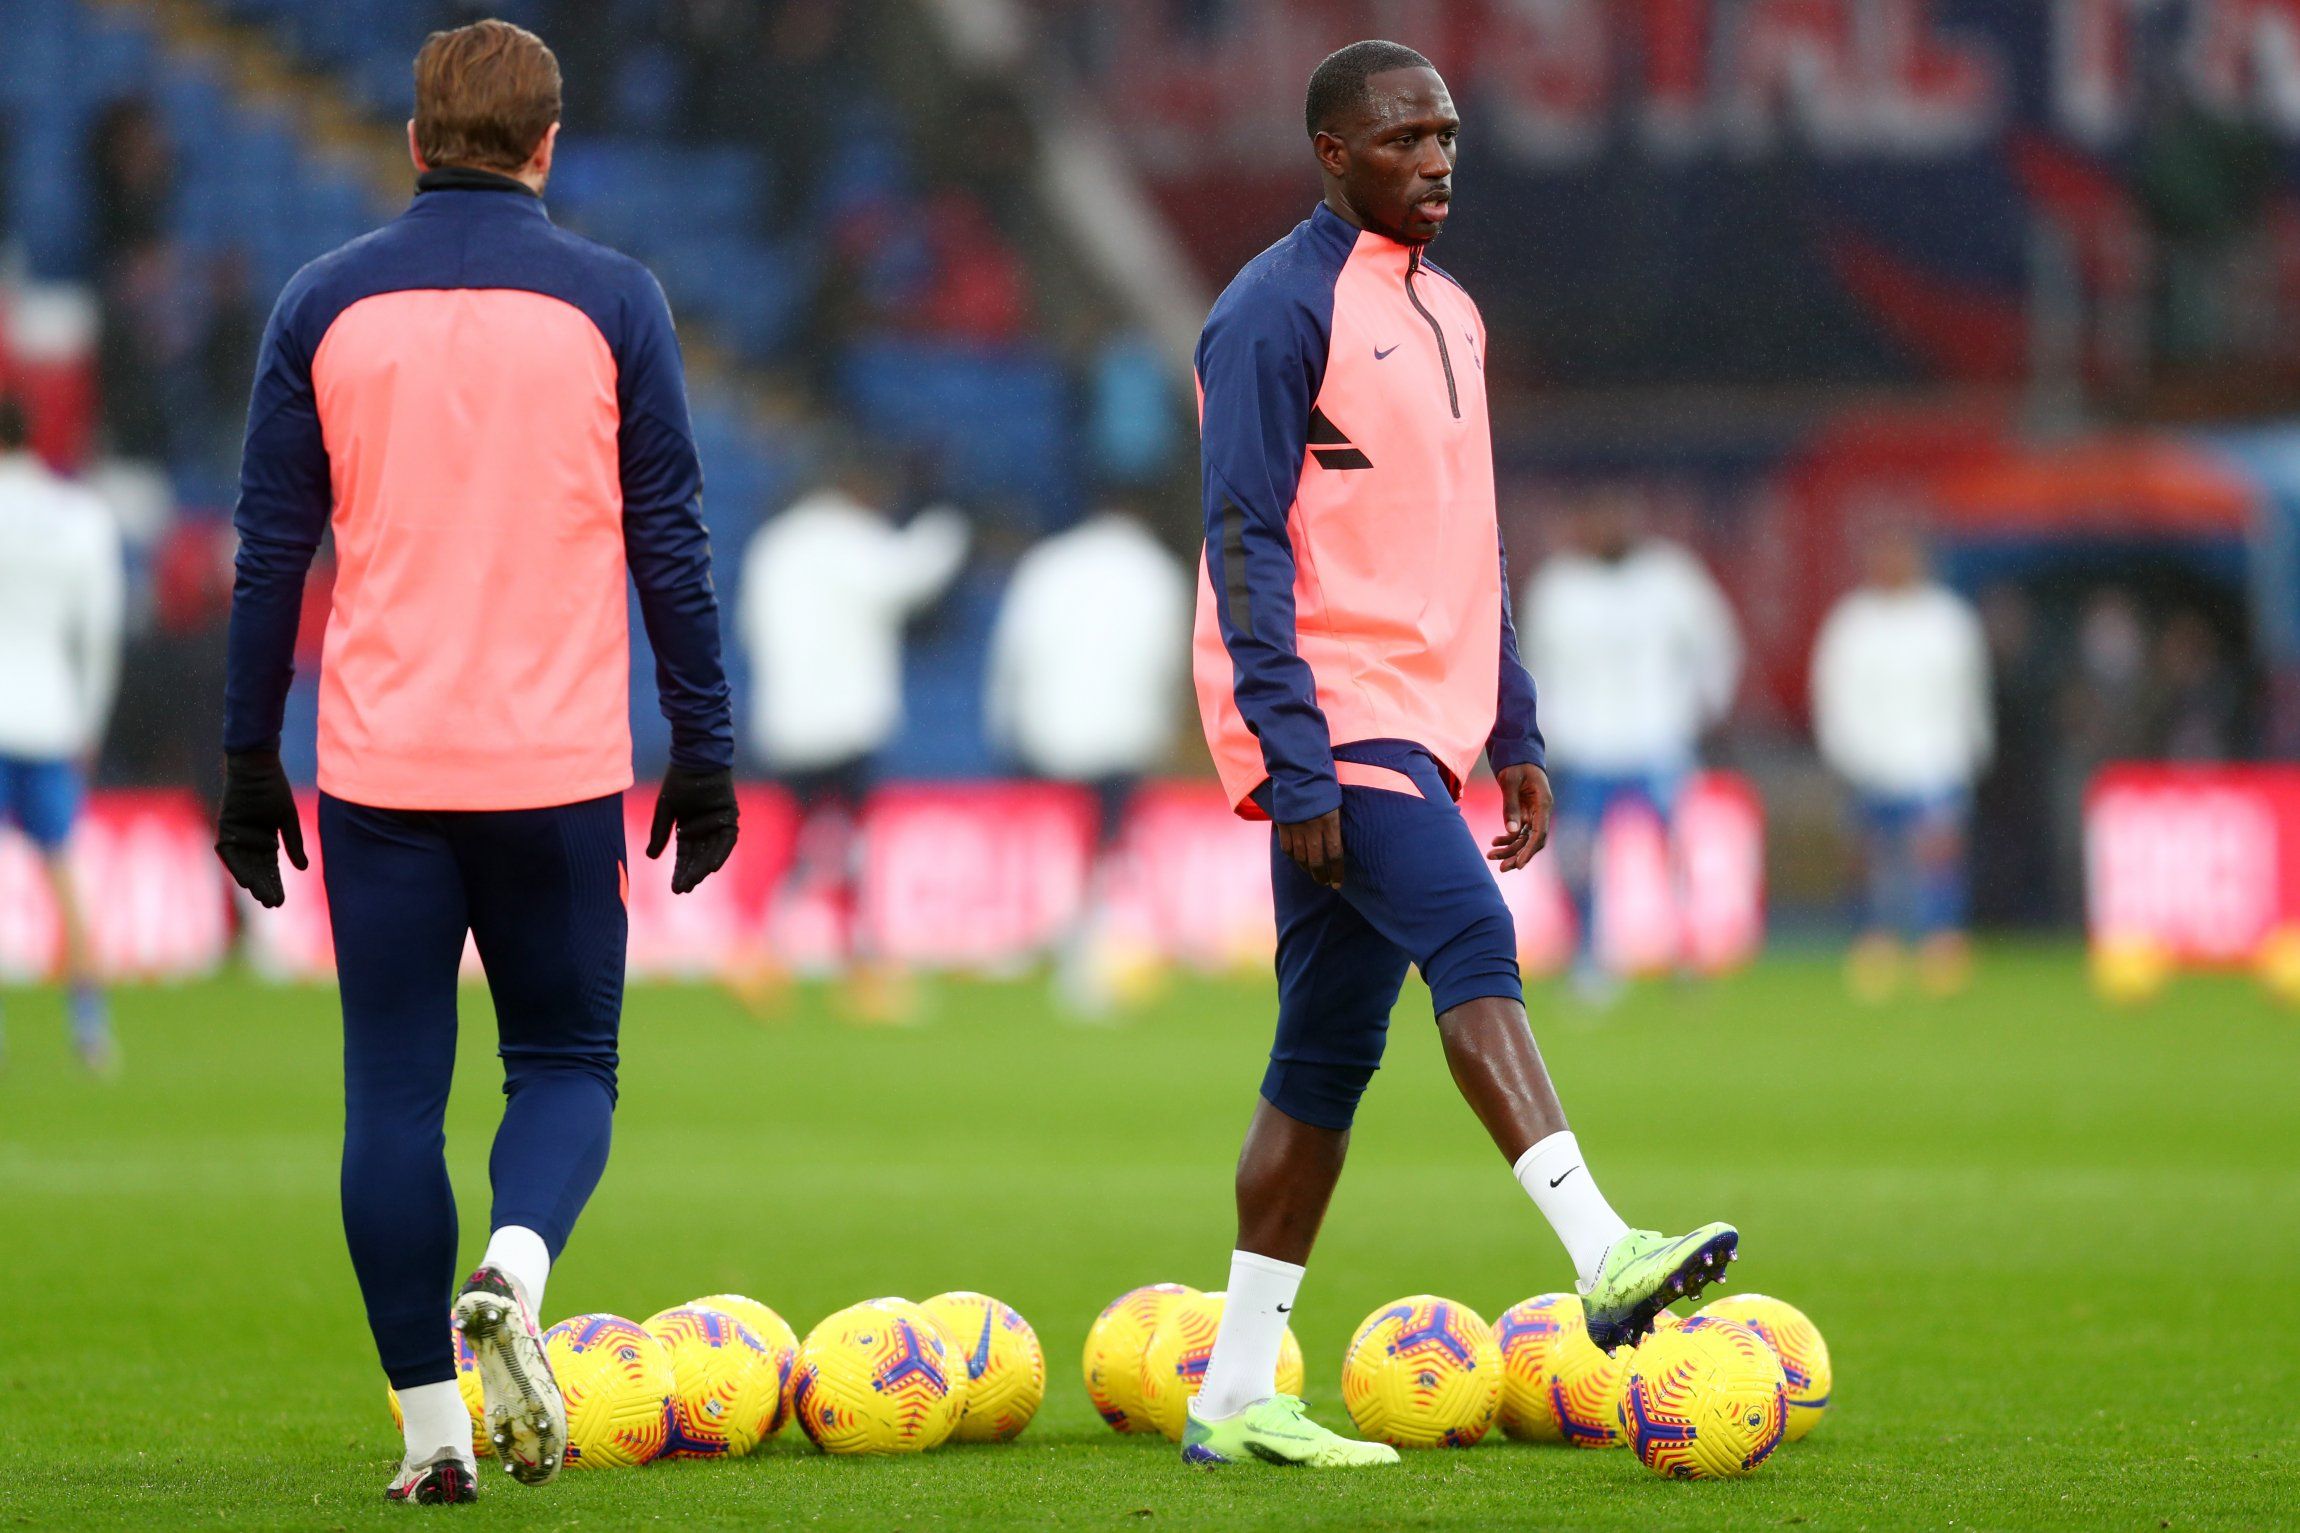 spurs midfield moussa sissoko during warm up before kick off against palace in the premier league